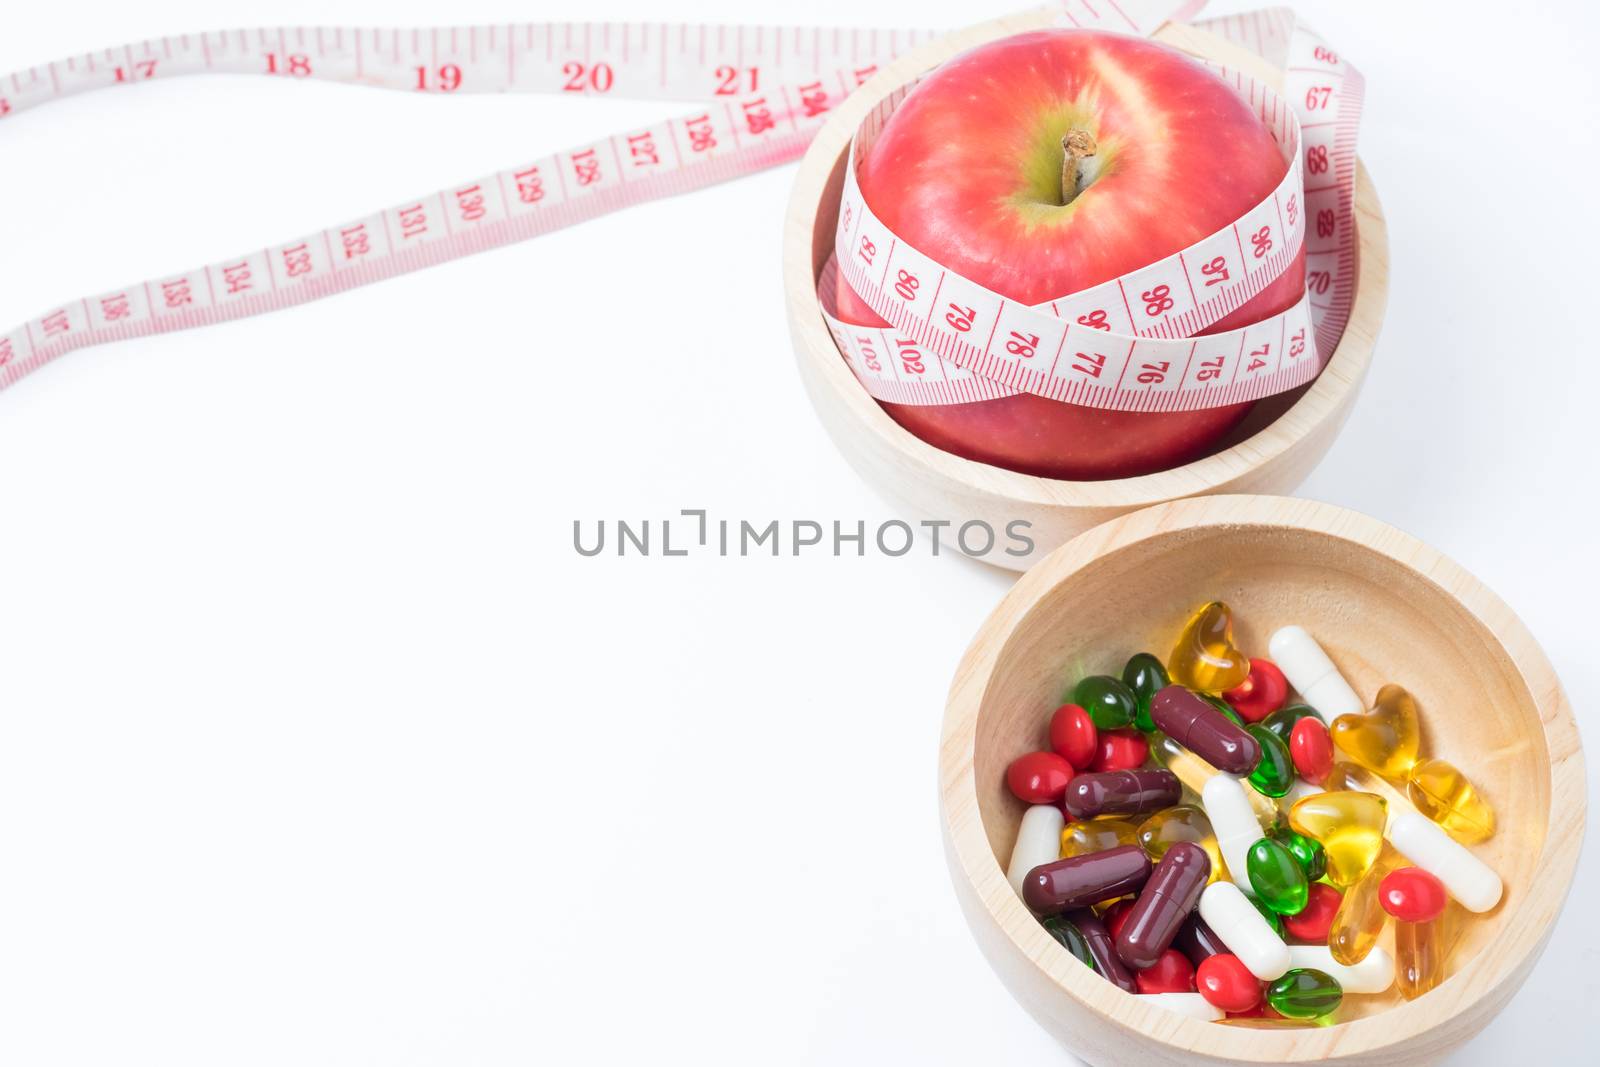 red apple and vitamin (medicine) in wooden bowl with waist measure on white background. space for adding your text.